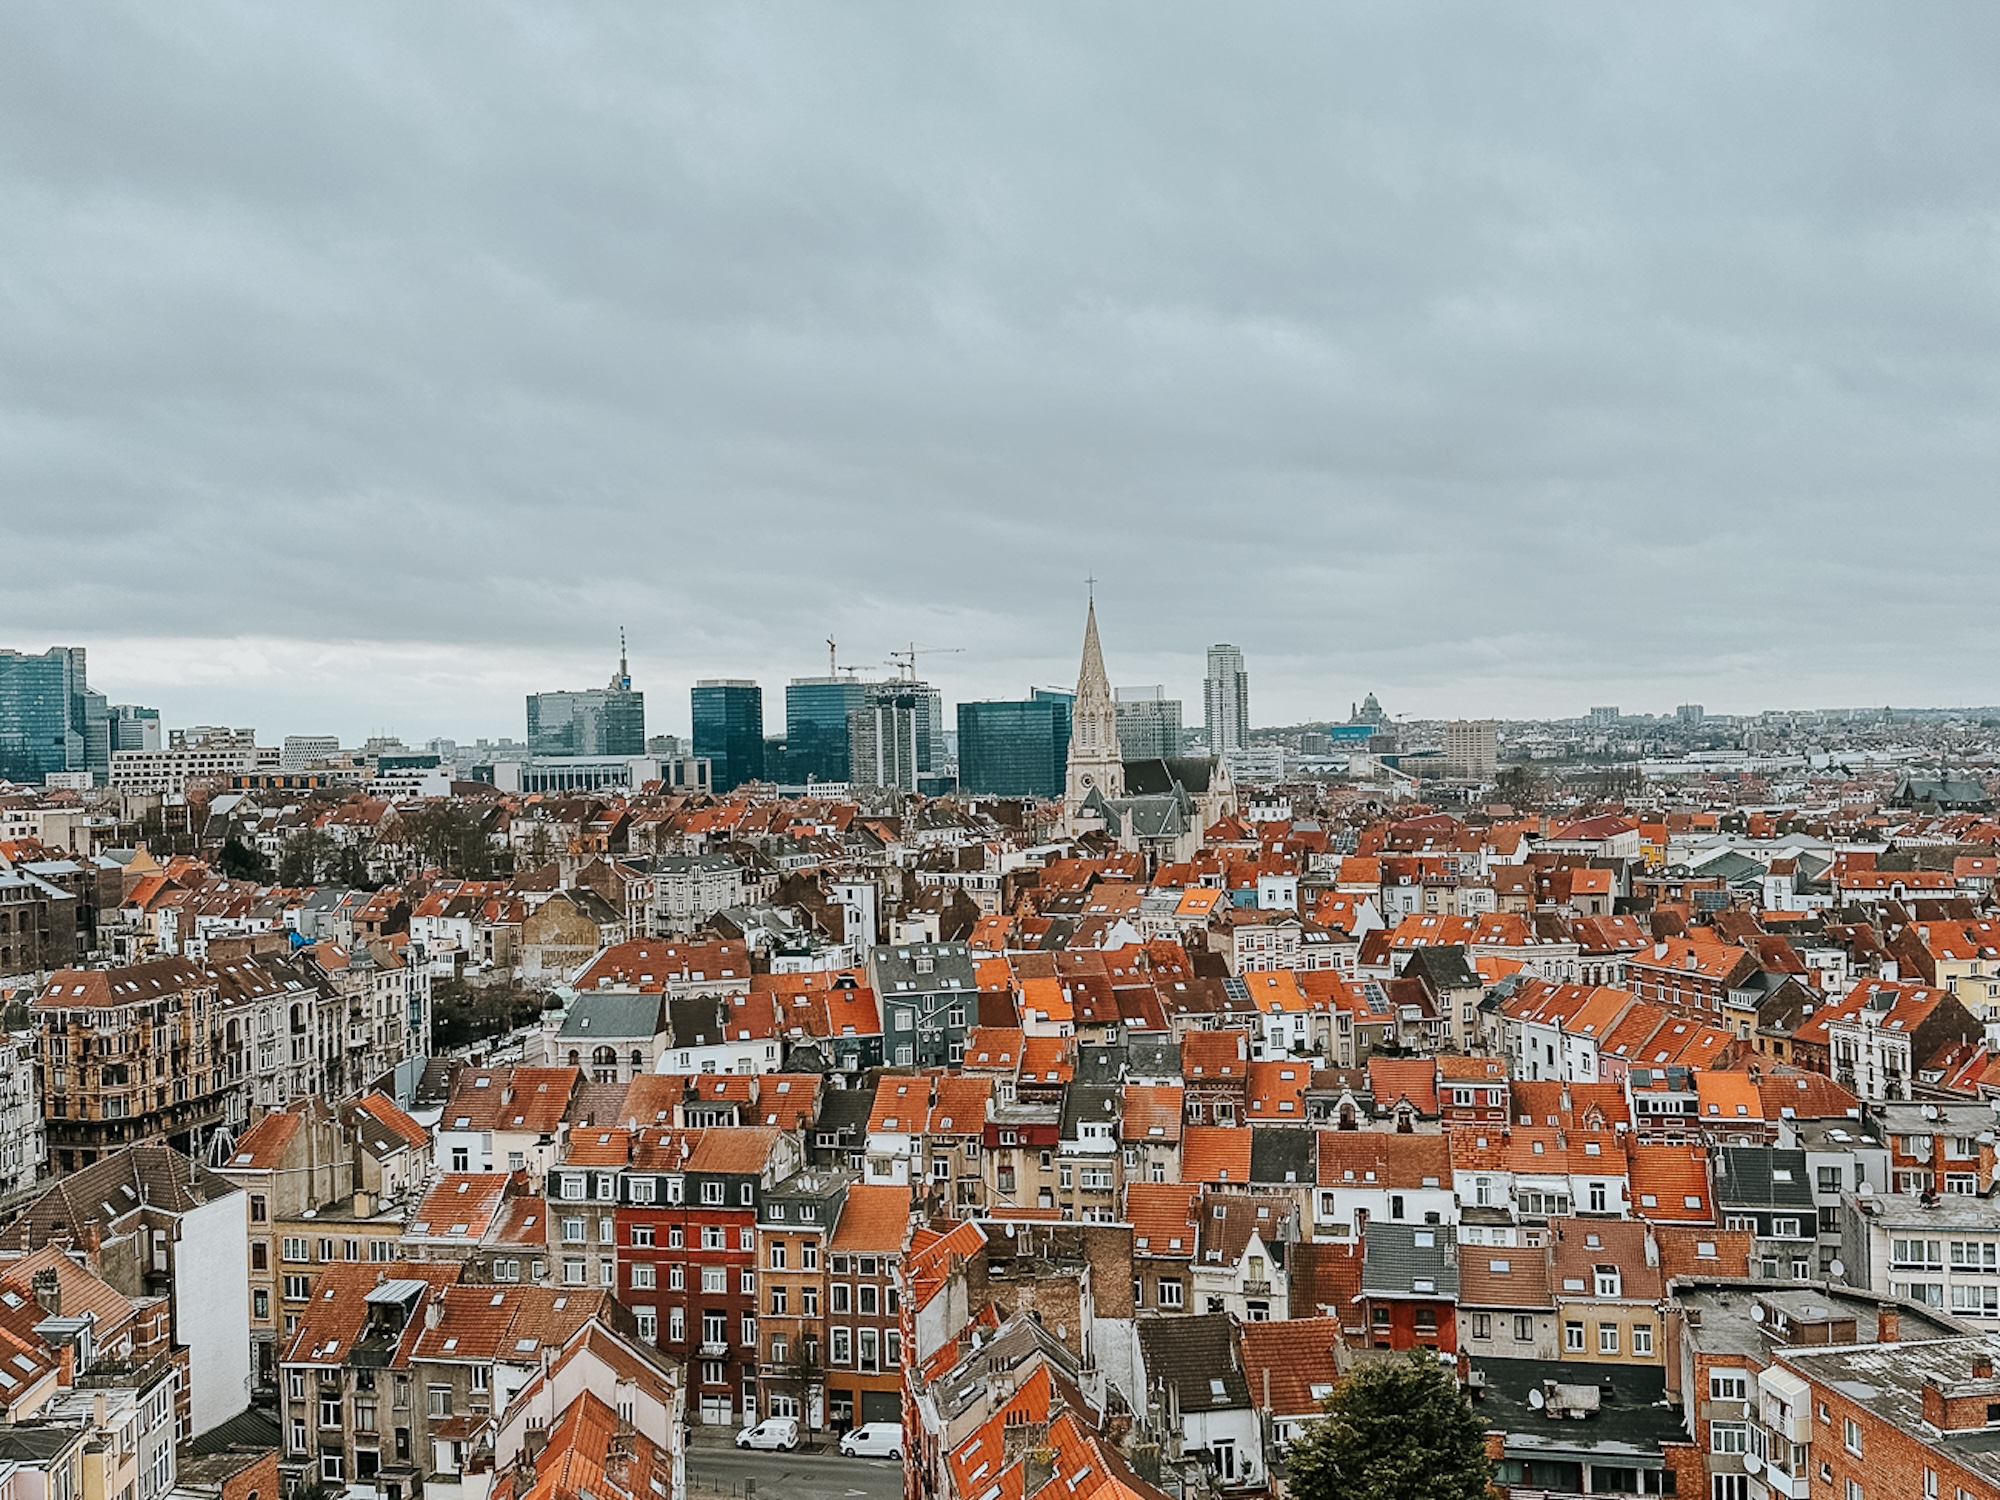 Overview of Brussels skyline